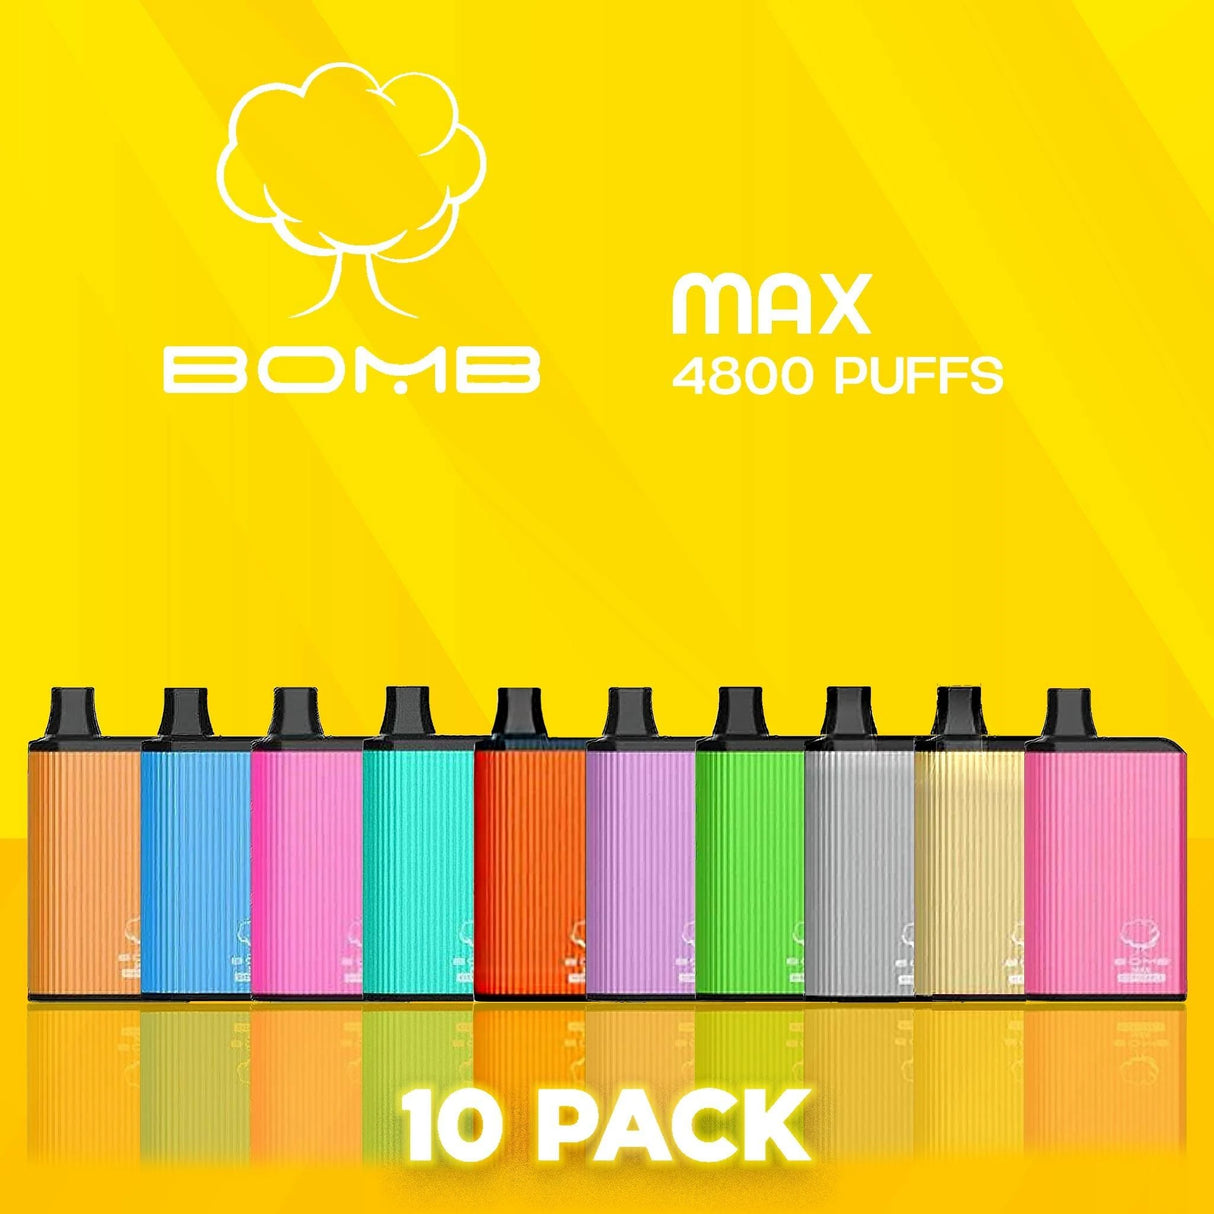 Bomb Max Disposable Vape 4800 Puffs - 10 Pack-